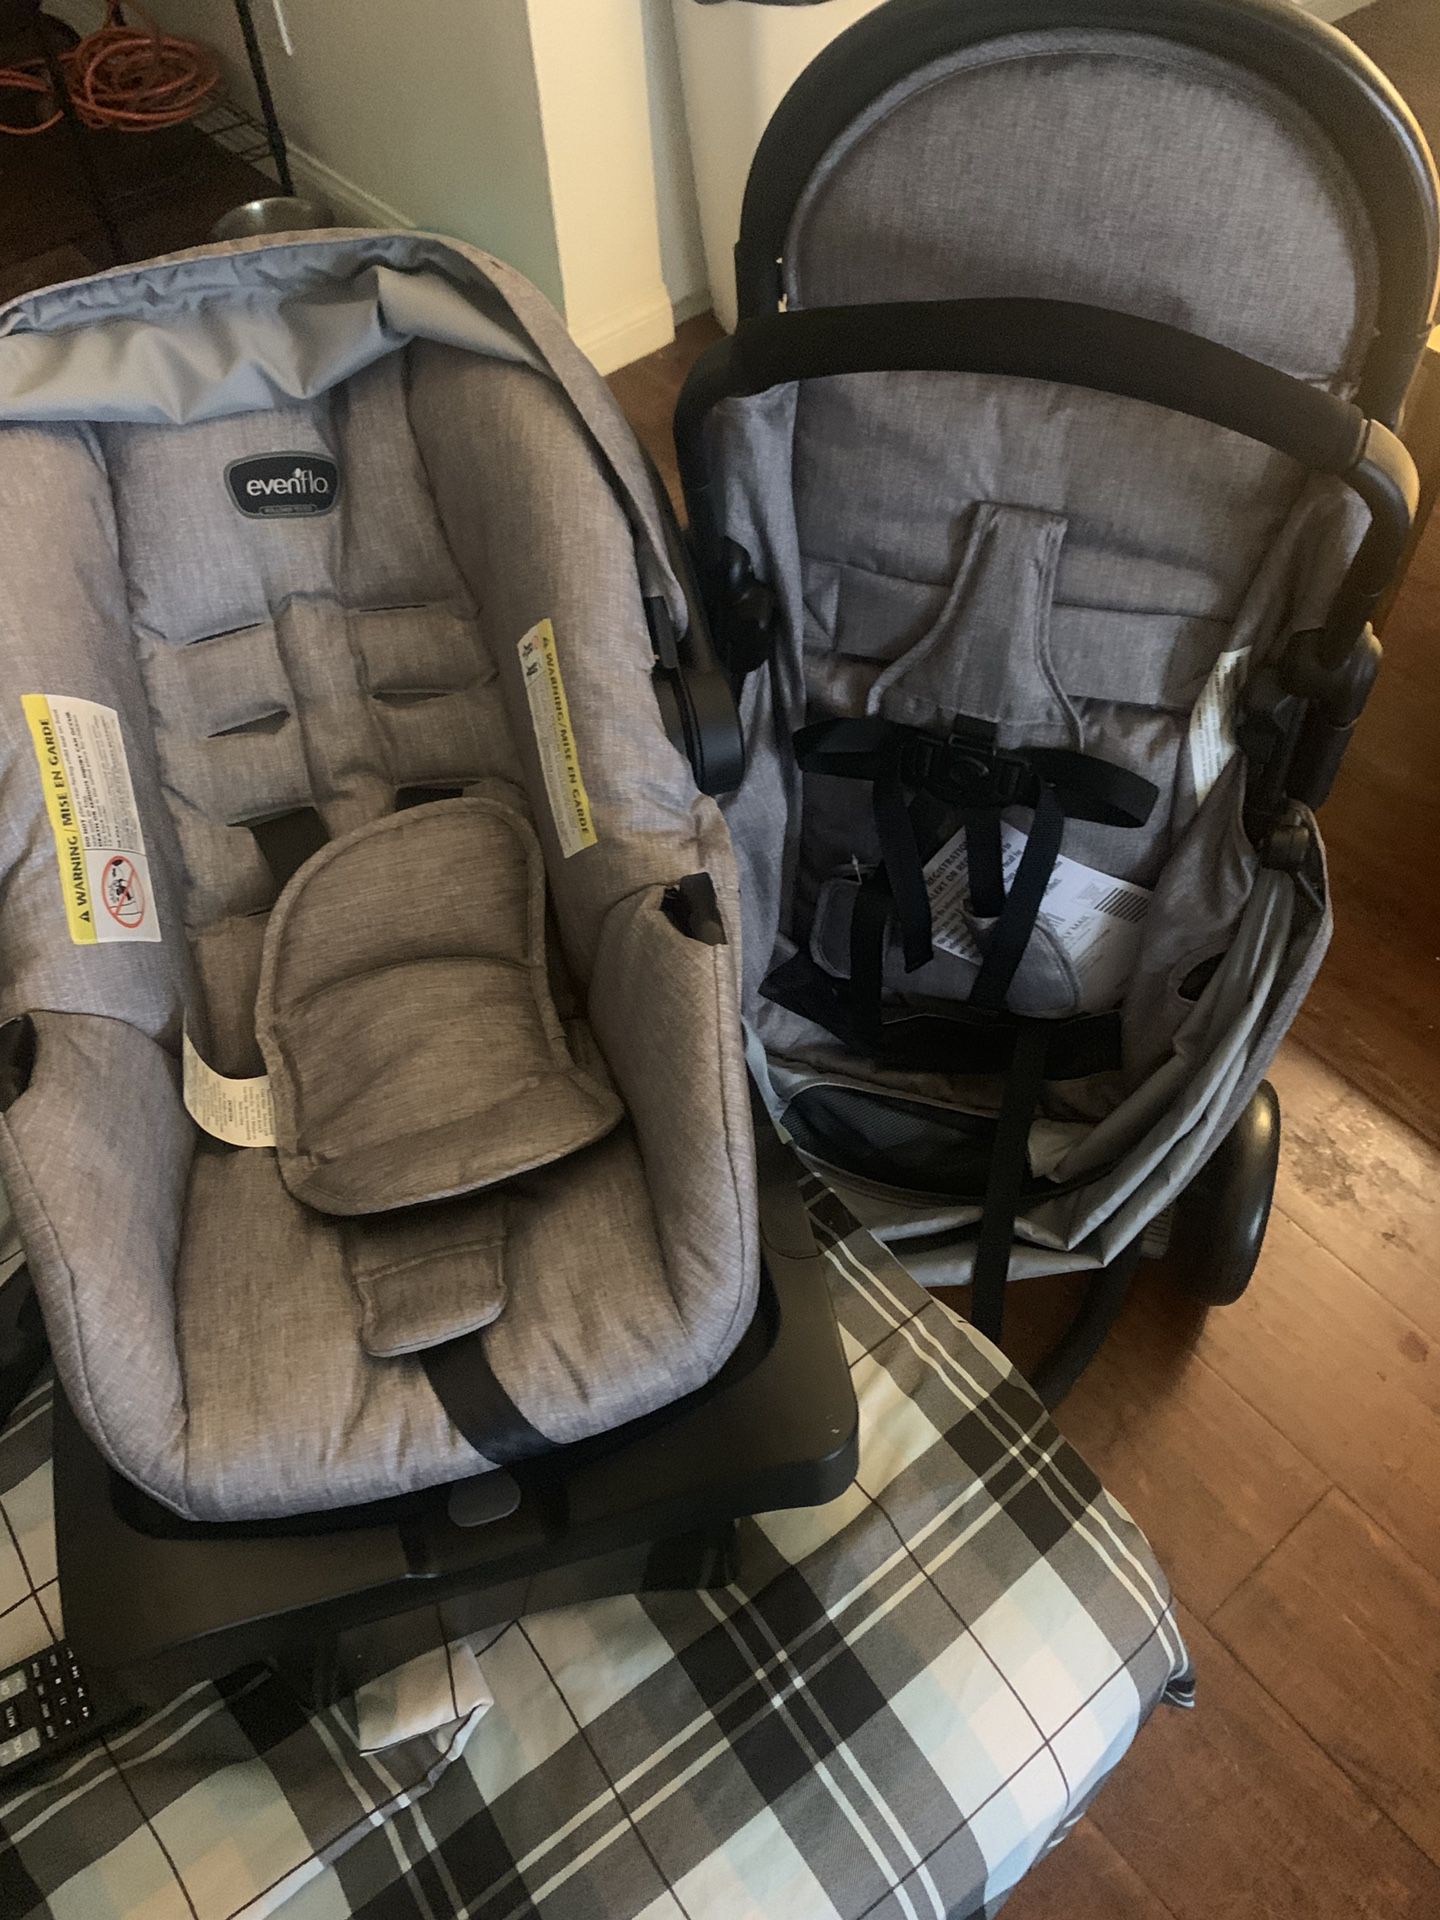 Never used Even flo stroller with infant car seat